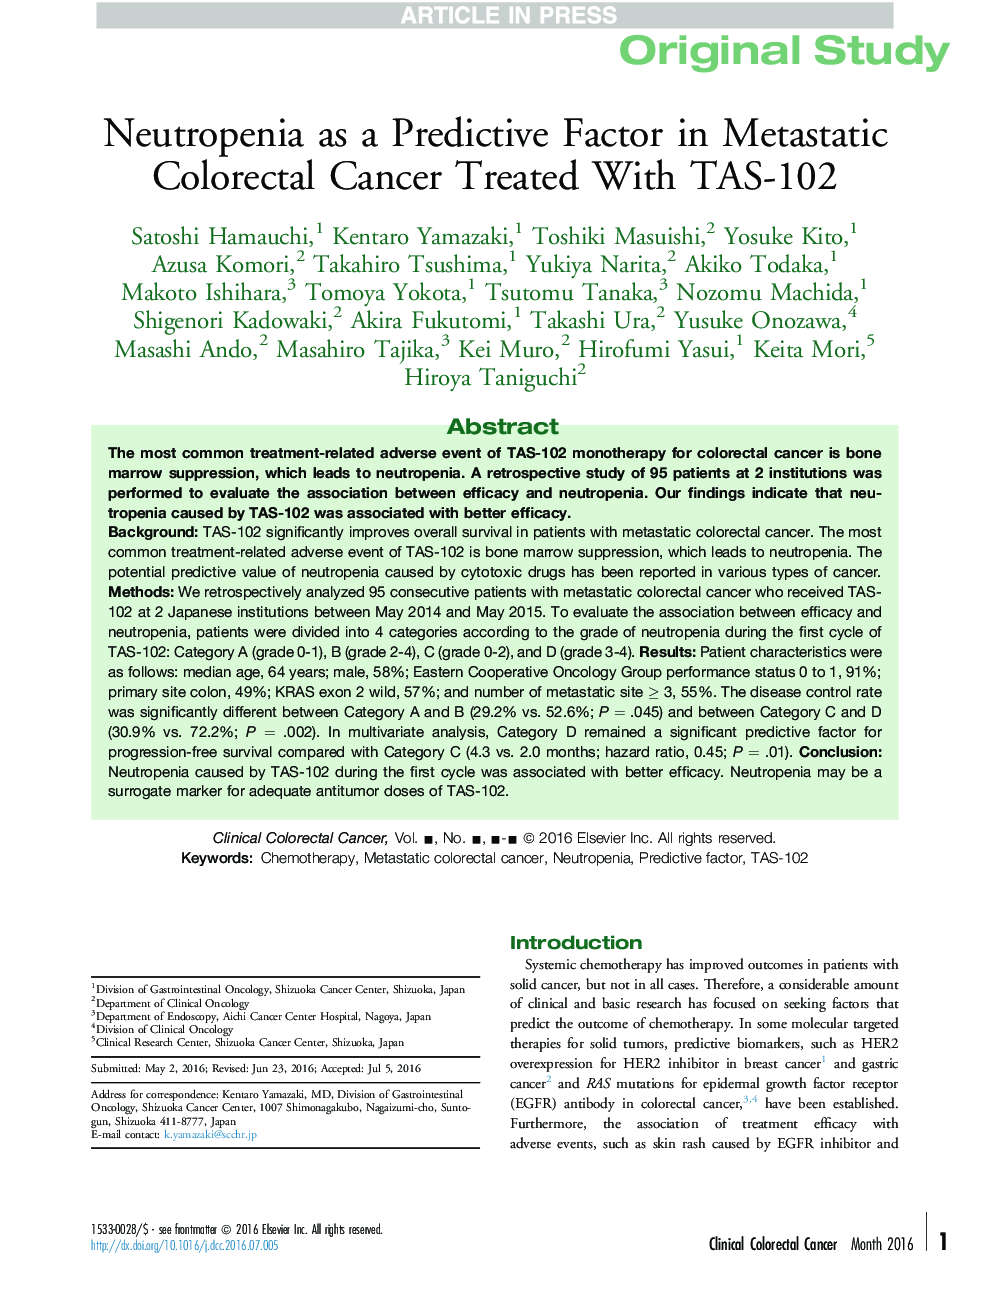 Neutropenia as a Predictive Factor in Metastatic Colorectal Cancer Treated With TAS-102